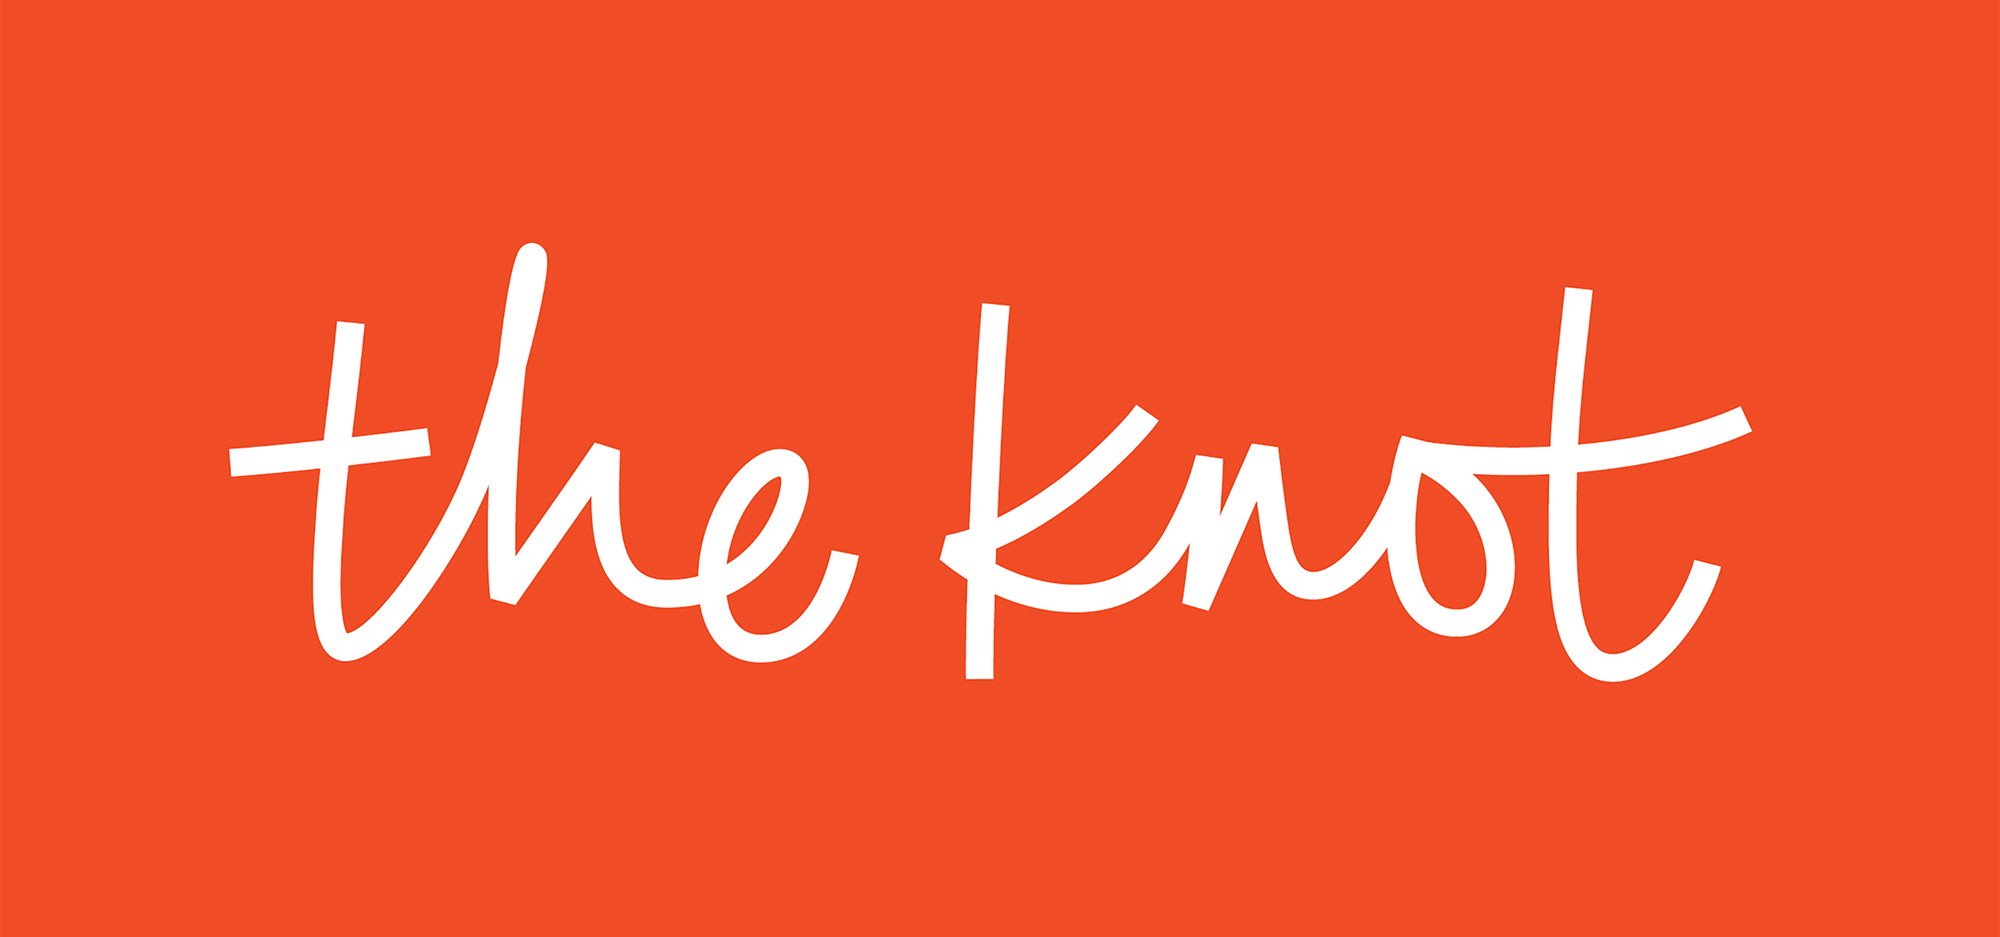 New Logo and Identity for The Knot by Pentagram